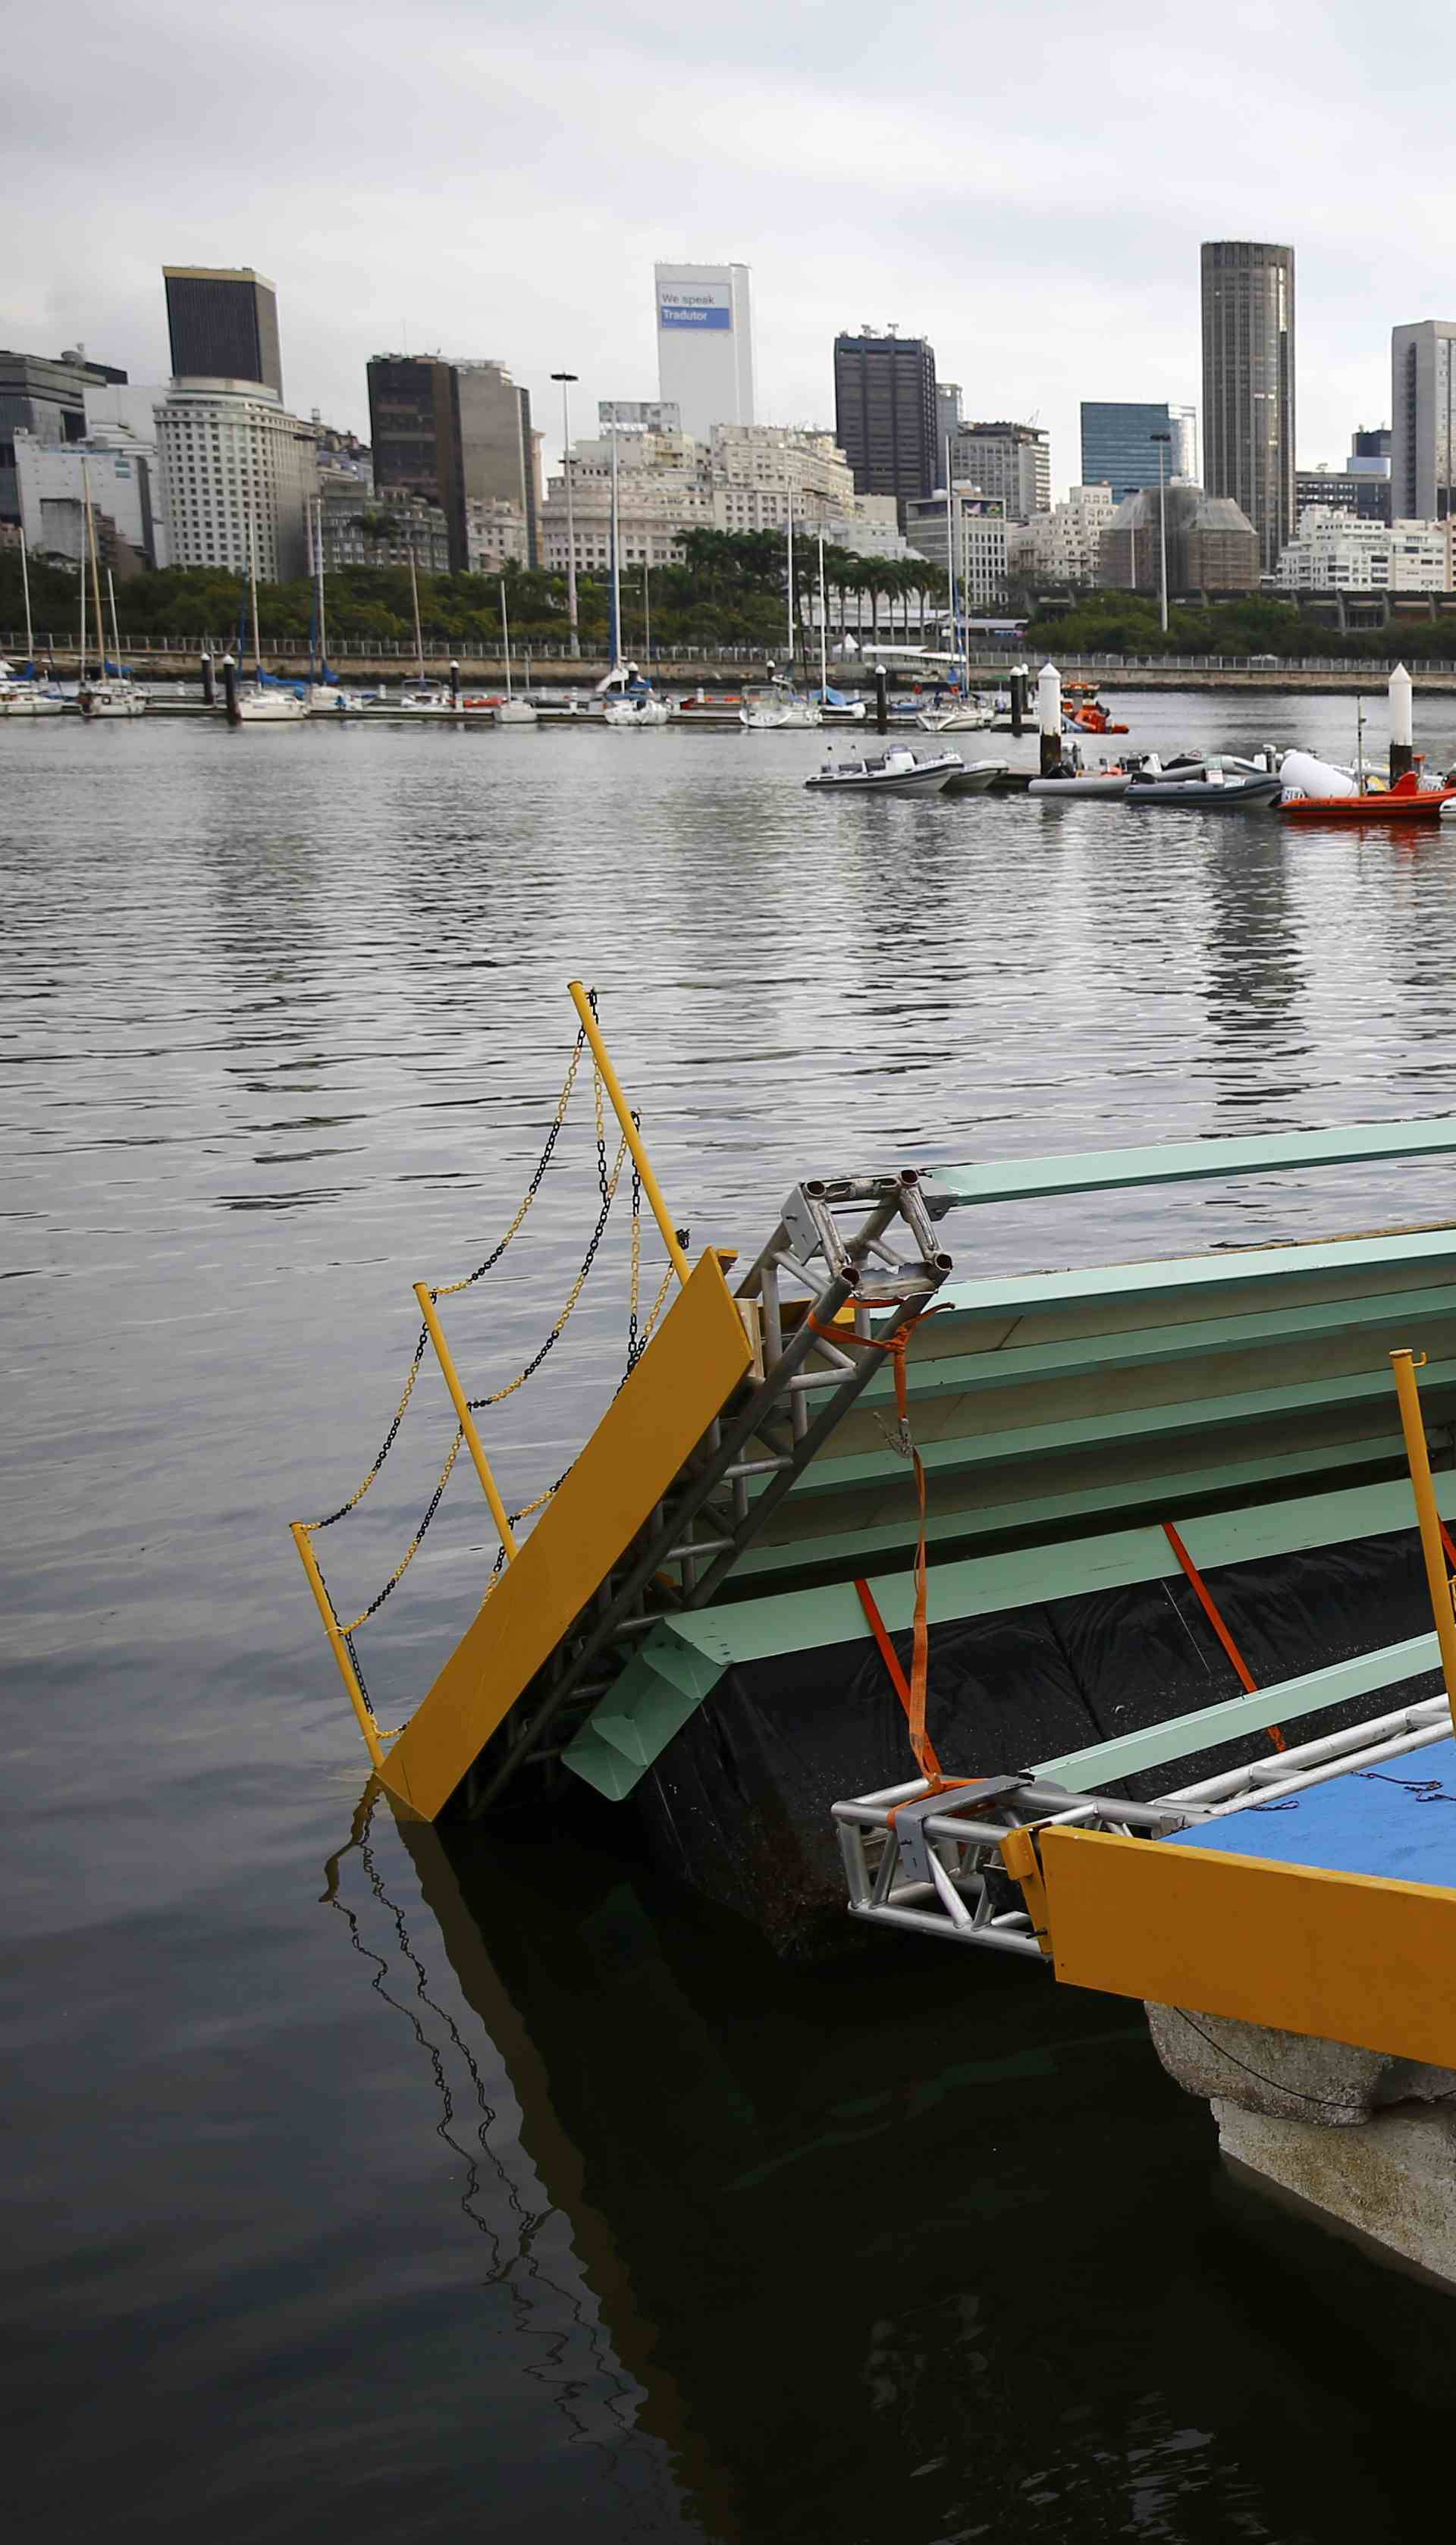 A ramp built for competitors' boats to reach the water hangs after collapsing at the Marina da Gloria in Rio de Janeiro